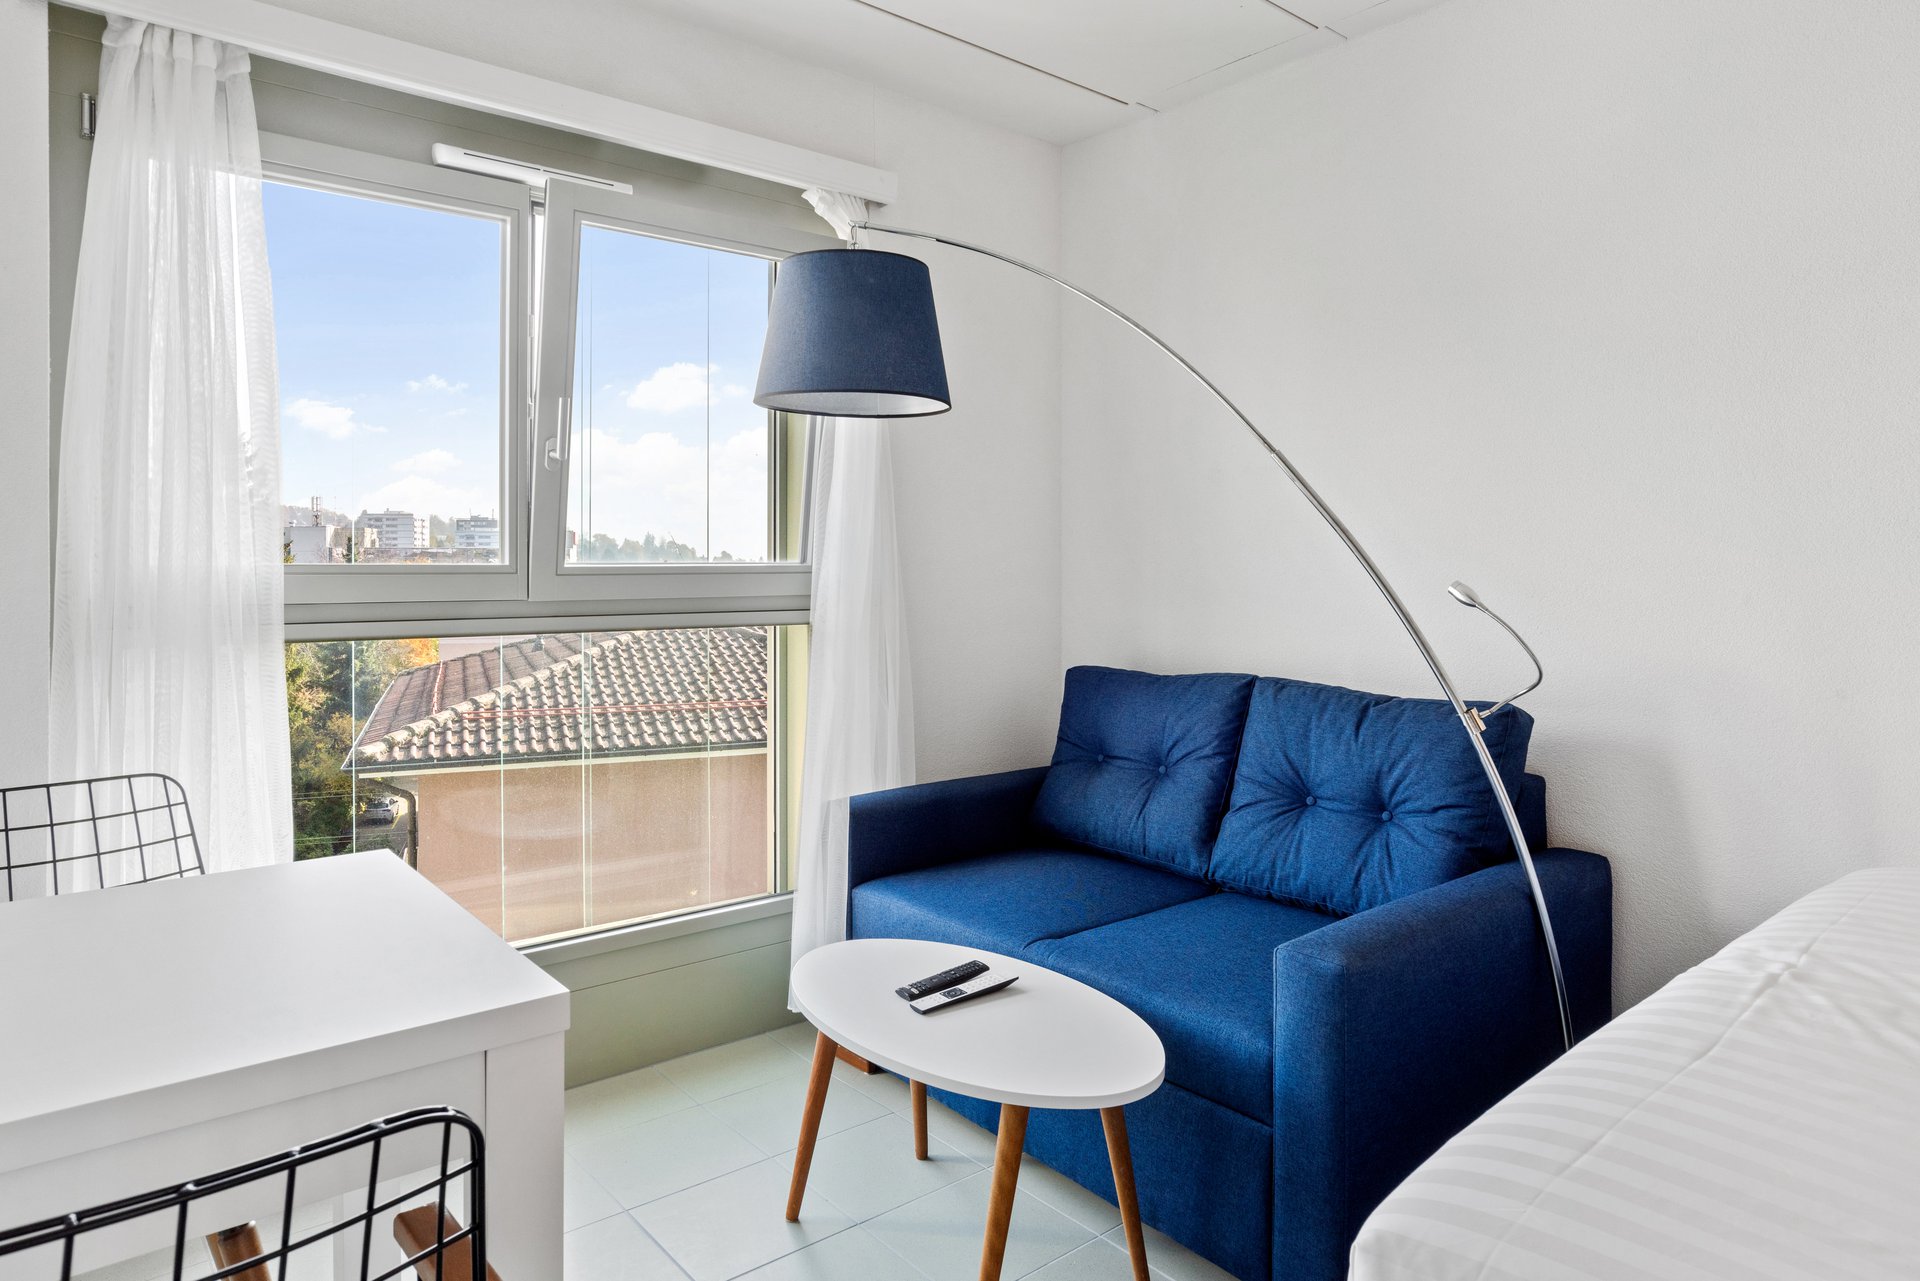 One of the brand new furnished studios located on the heights of Lausanne, in the very convenient La Sallaz, close to the Par